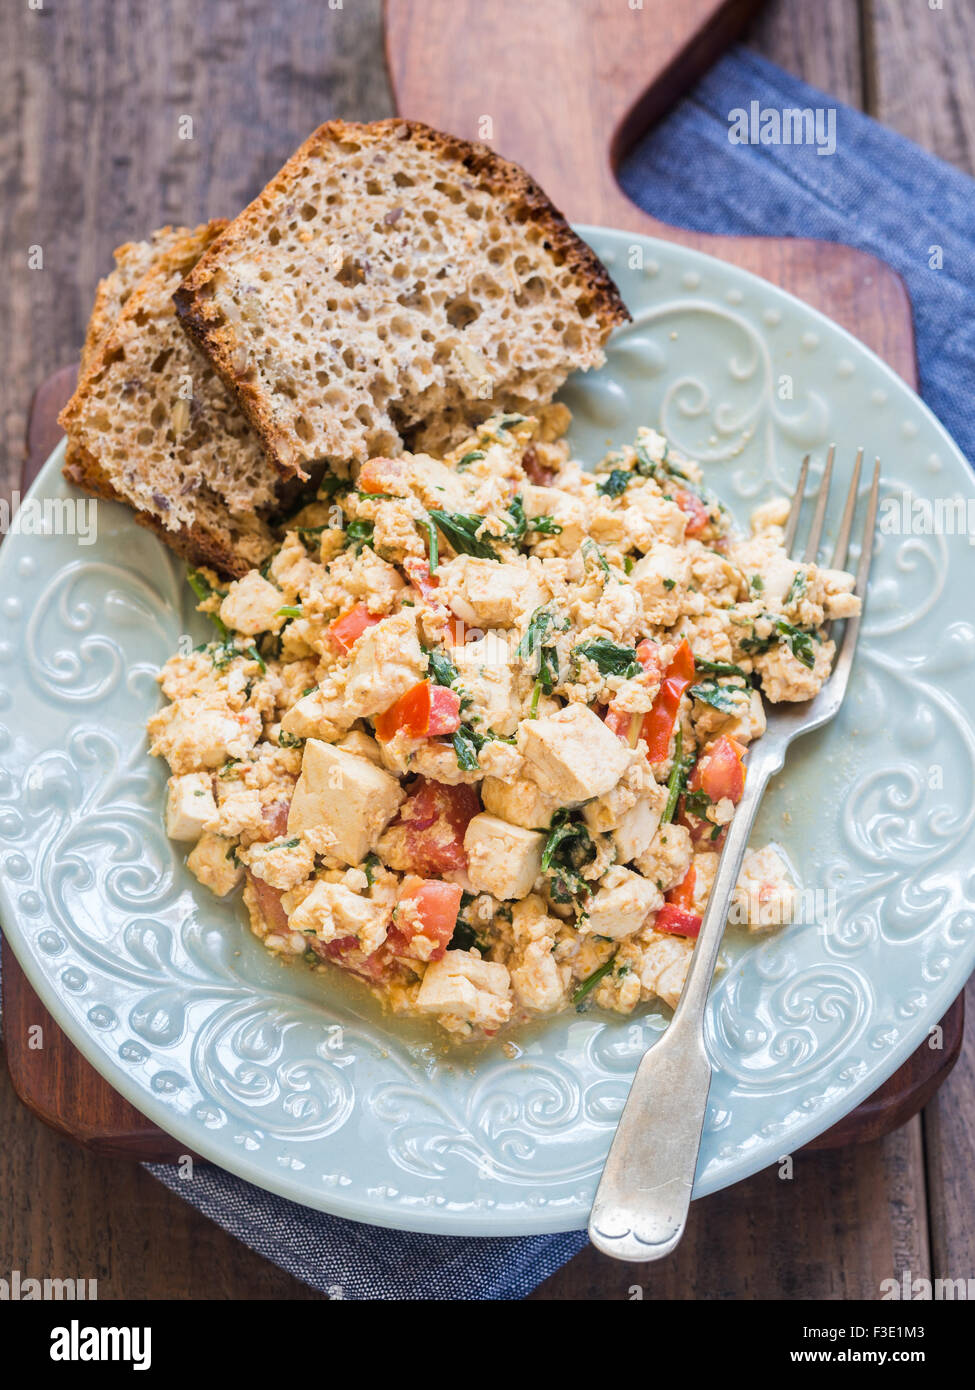 Vegan tofu scramble with tomato and green herbs served with wholegrain homemade bread. Wooden background. Stock Photo